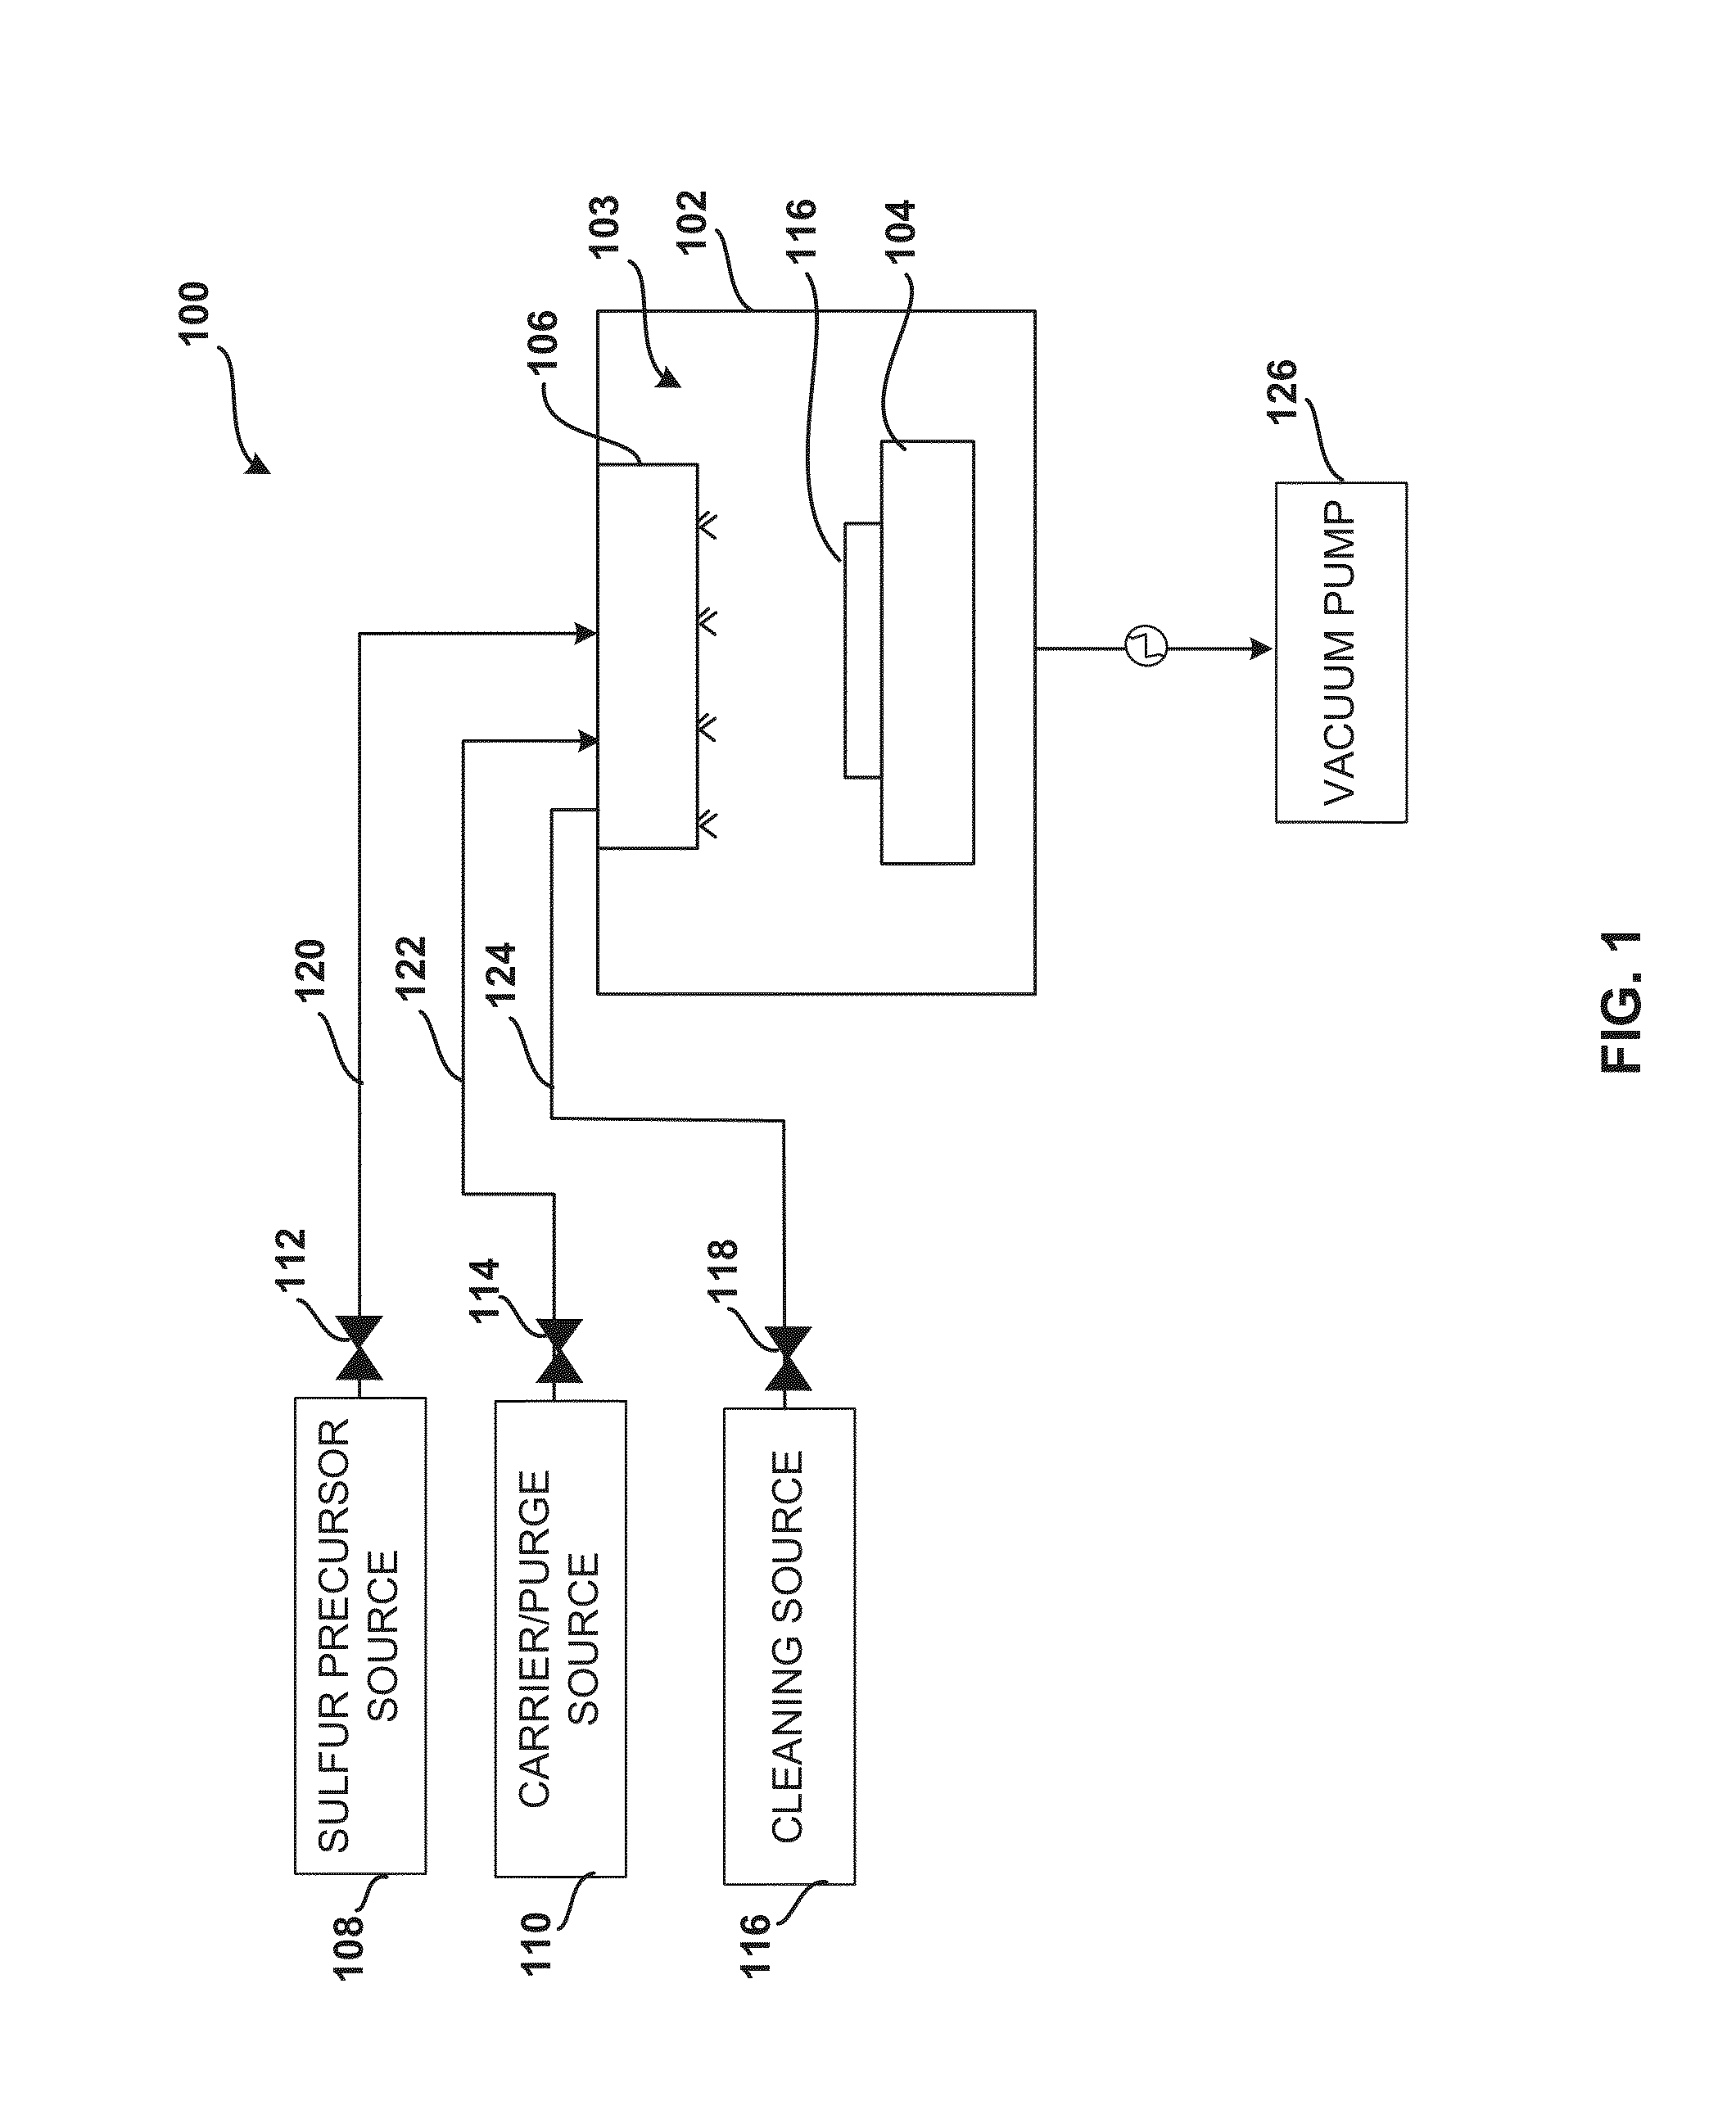 System and method for gas-phase sulfur passivation of a semiconductor surface